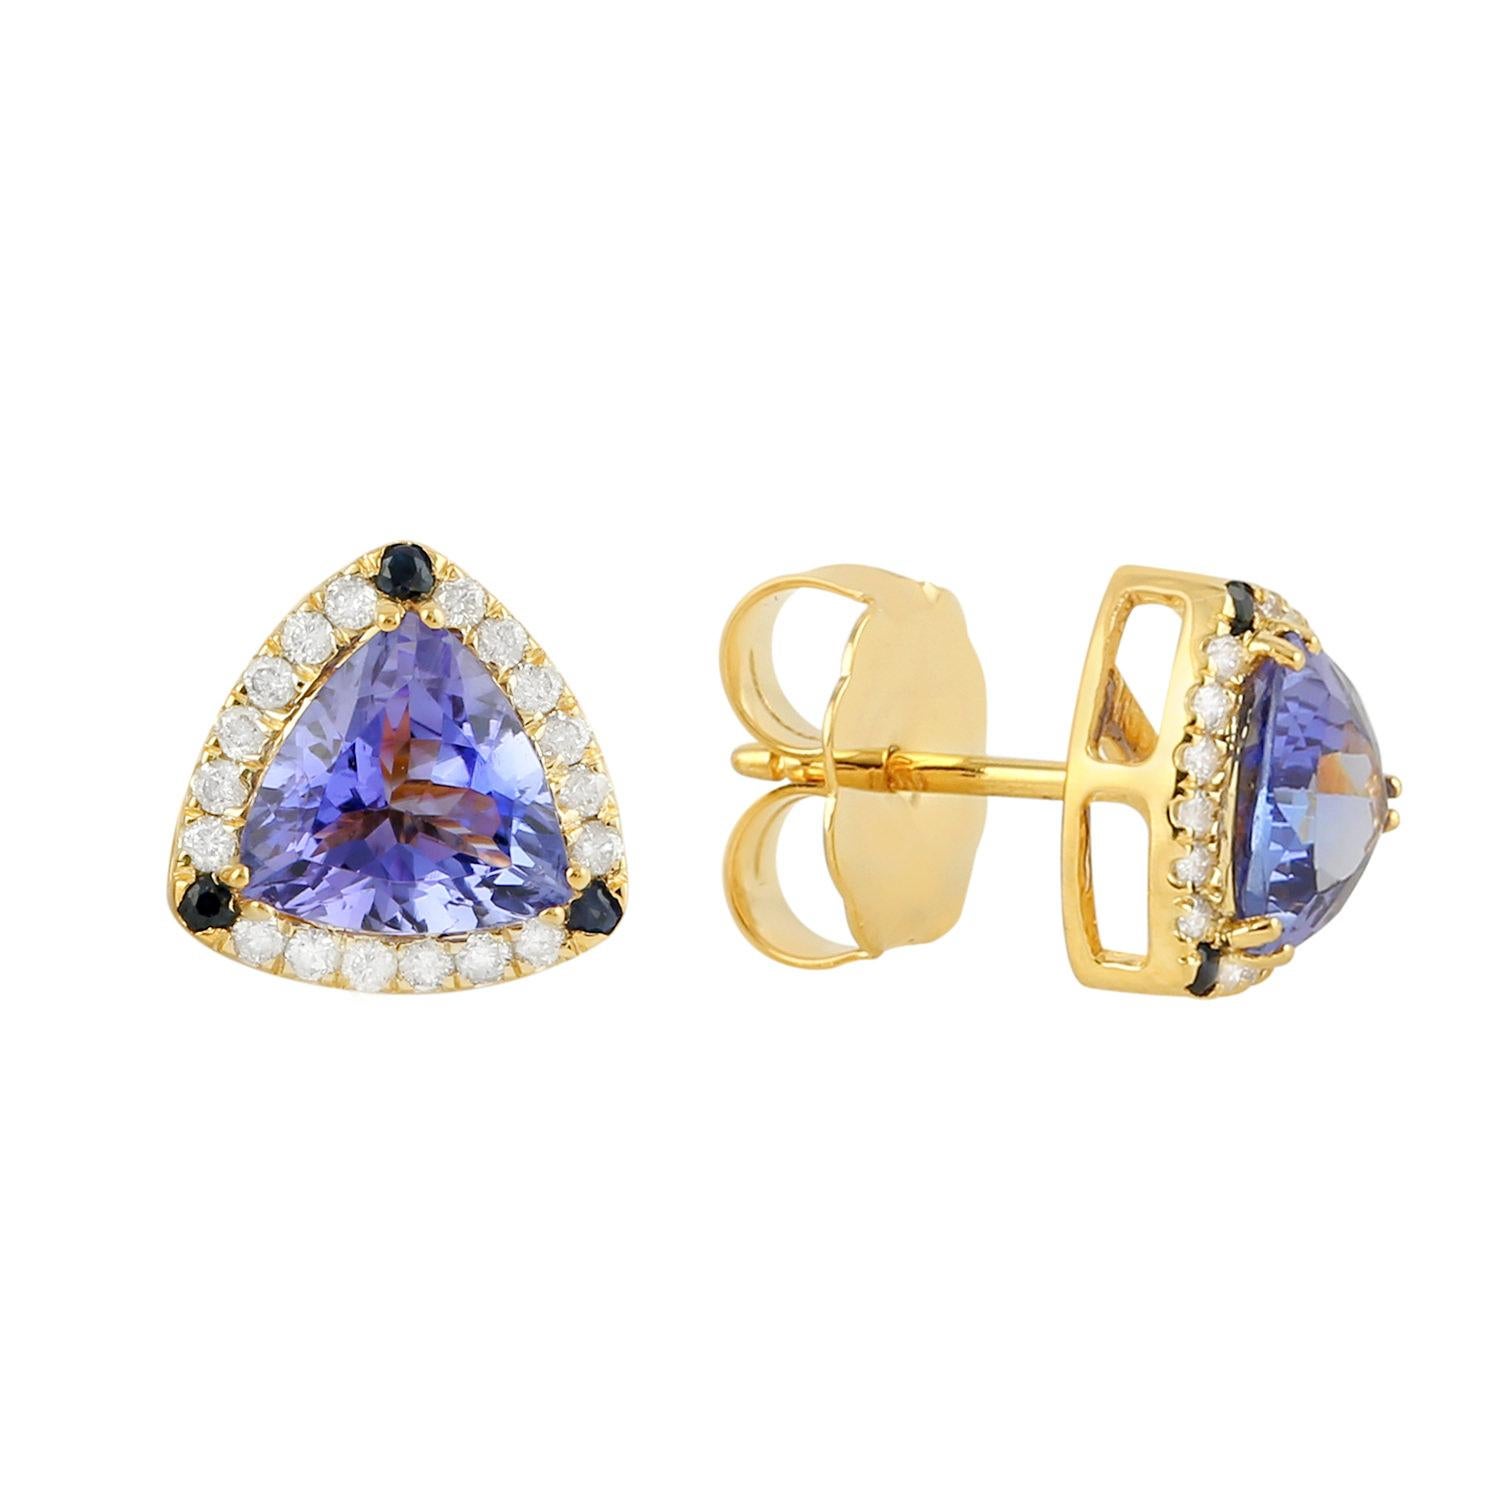 Trillion Cut Tanzanite Stud Earrings Blue Sapphires Diamonds 2.70 Carats 14K In Excellent Condition For Sale In Laguna Niguel, CA